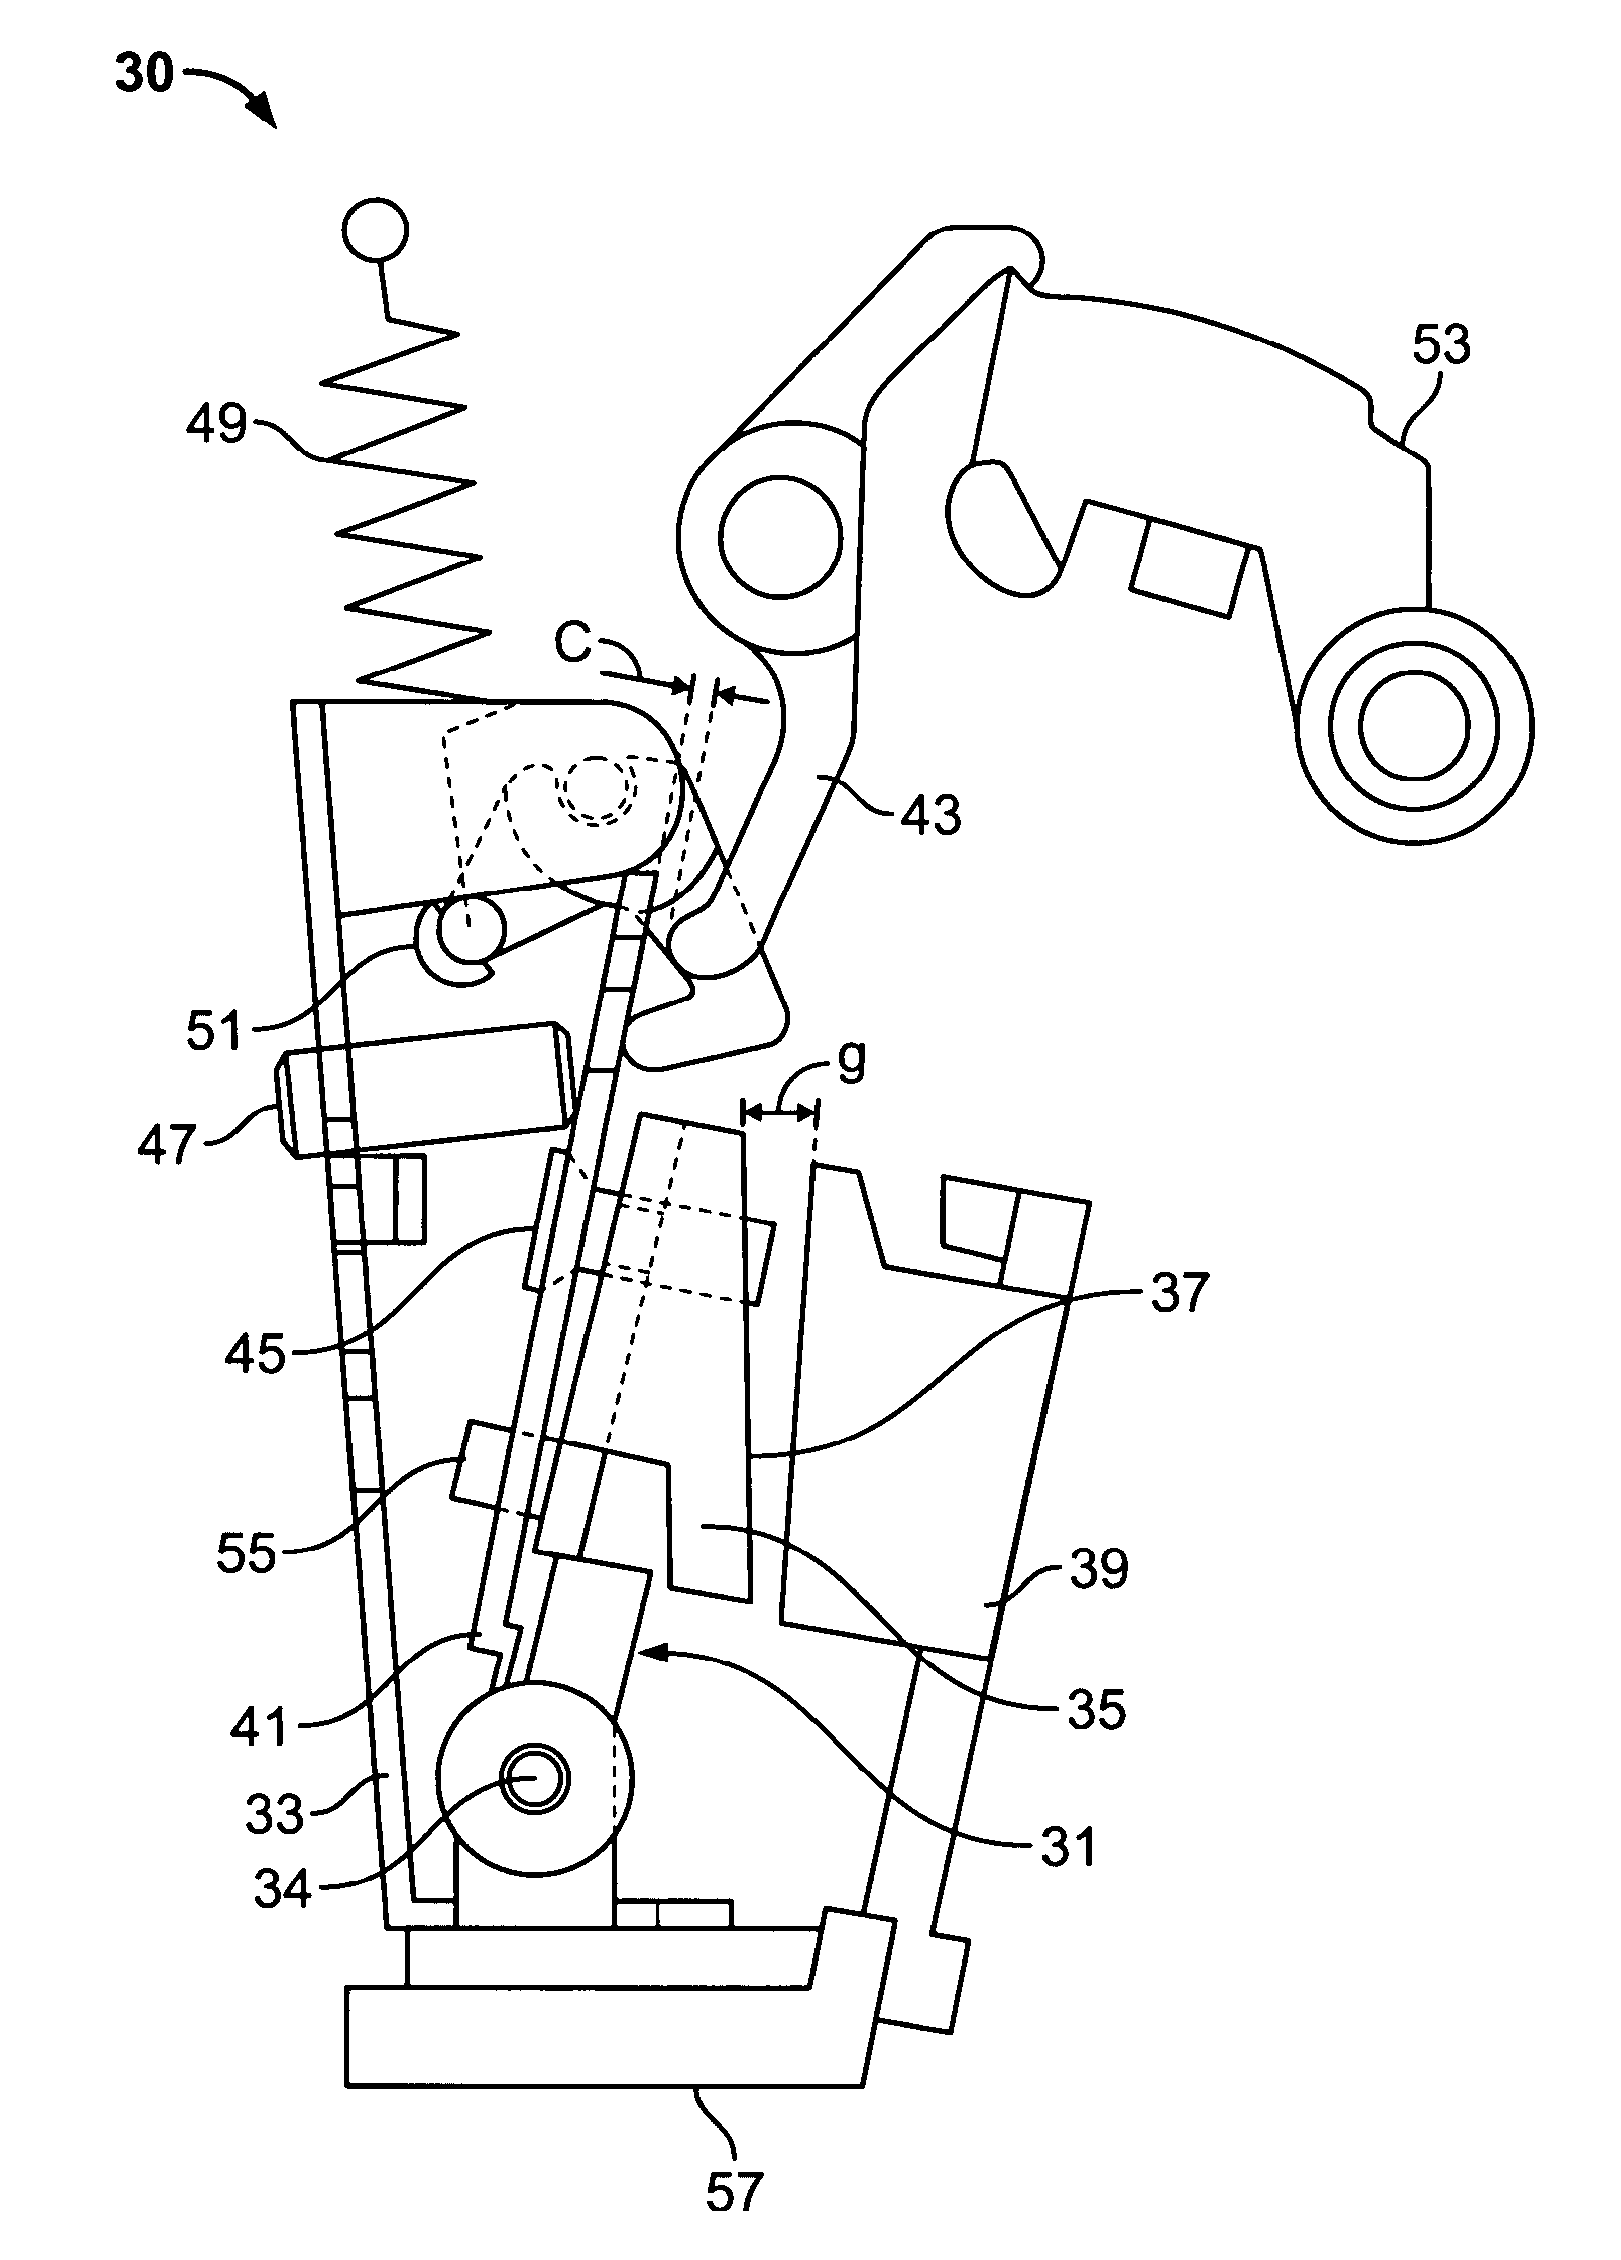 Divided adjustable armature for a circuit breaker